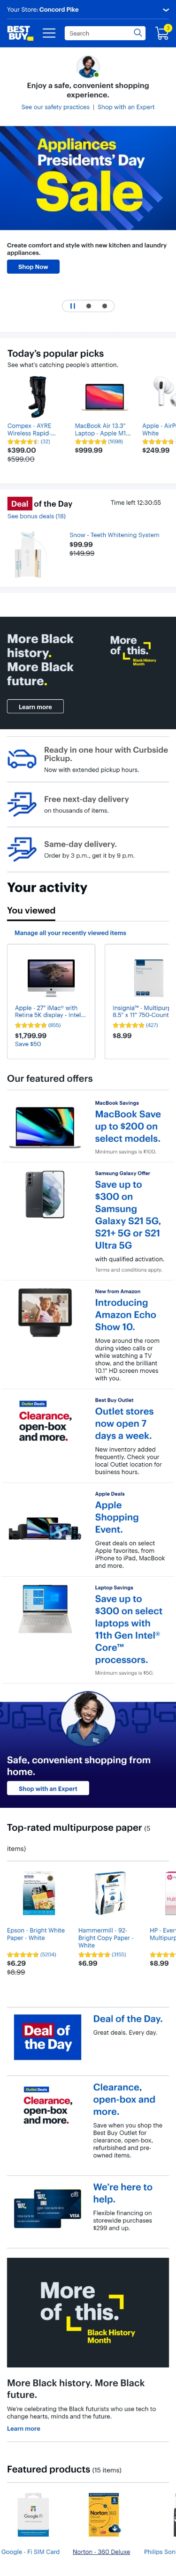 bestbuy home page mobile scaled